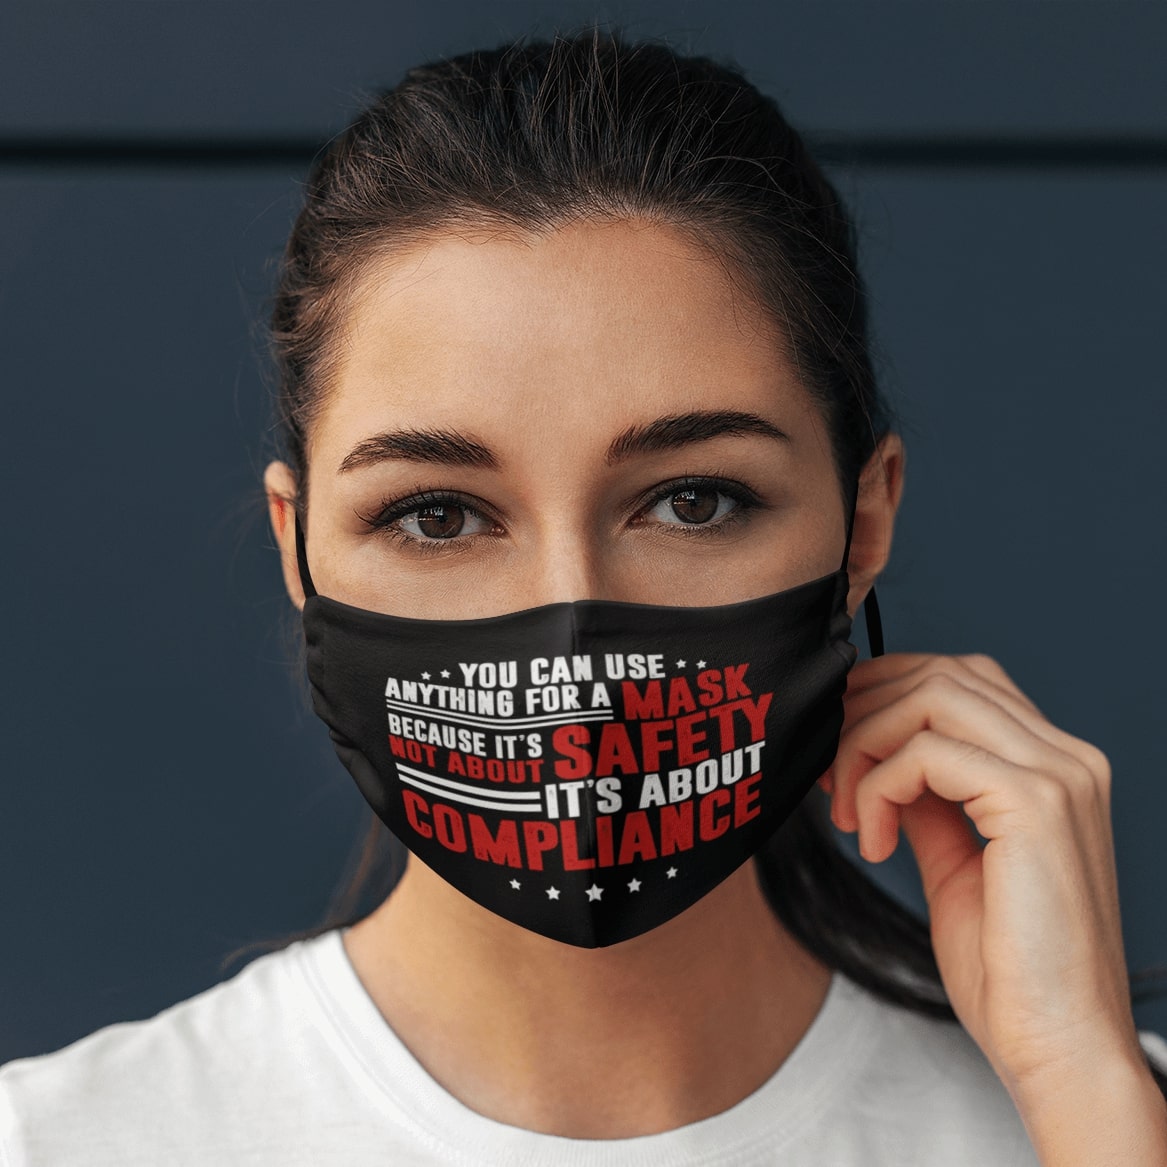 You can use anything for a mask because its not about safety face mask 1